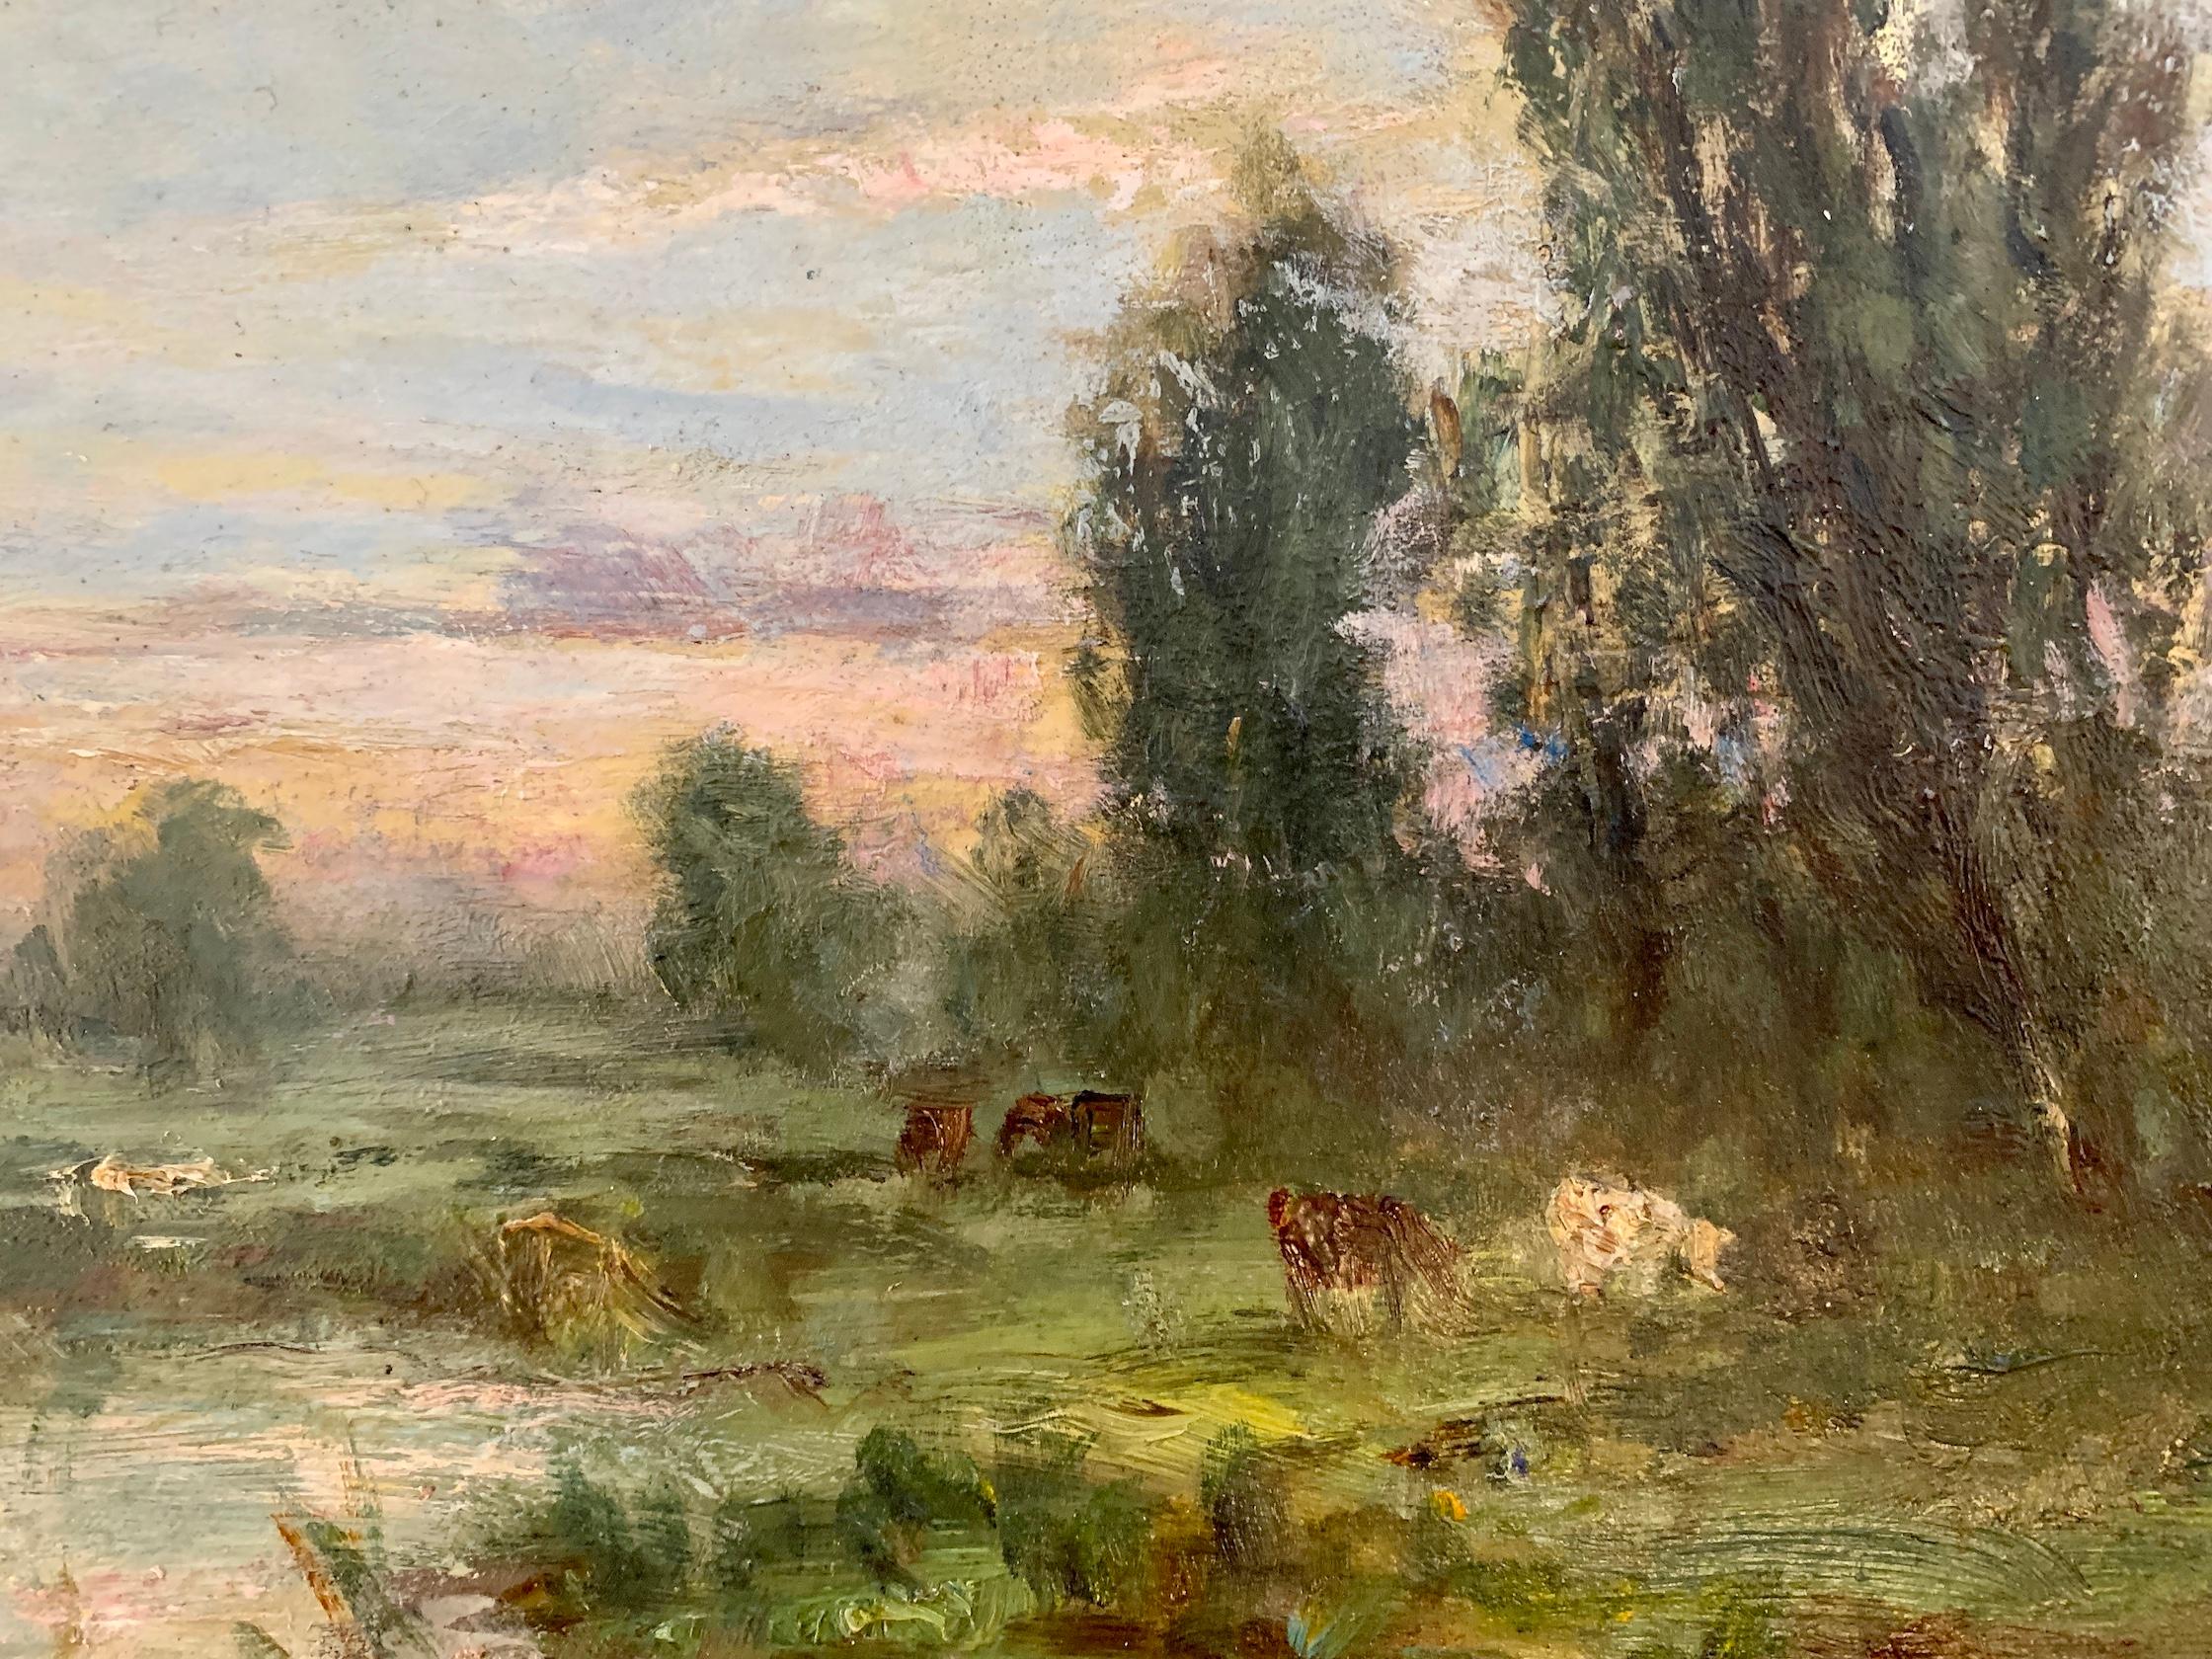 French impressionist landscape, Barbizon forest, with river and cows at Sunset - Brown Landscape Painting by George Boyle